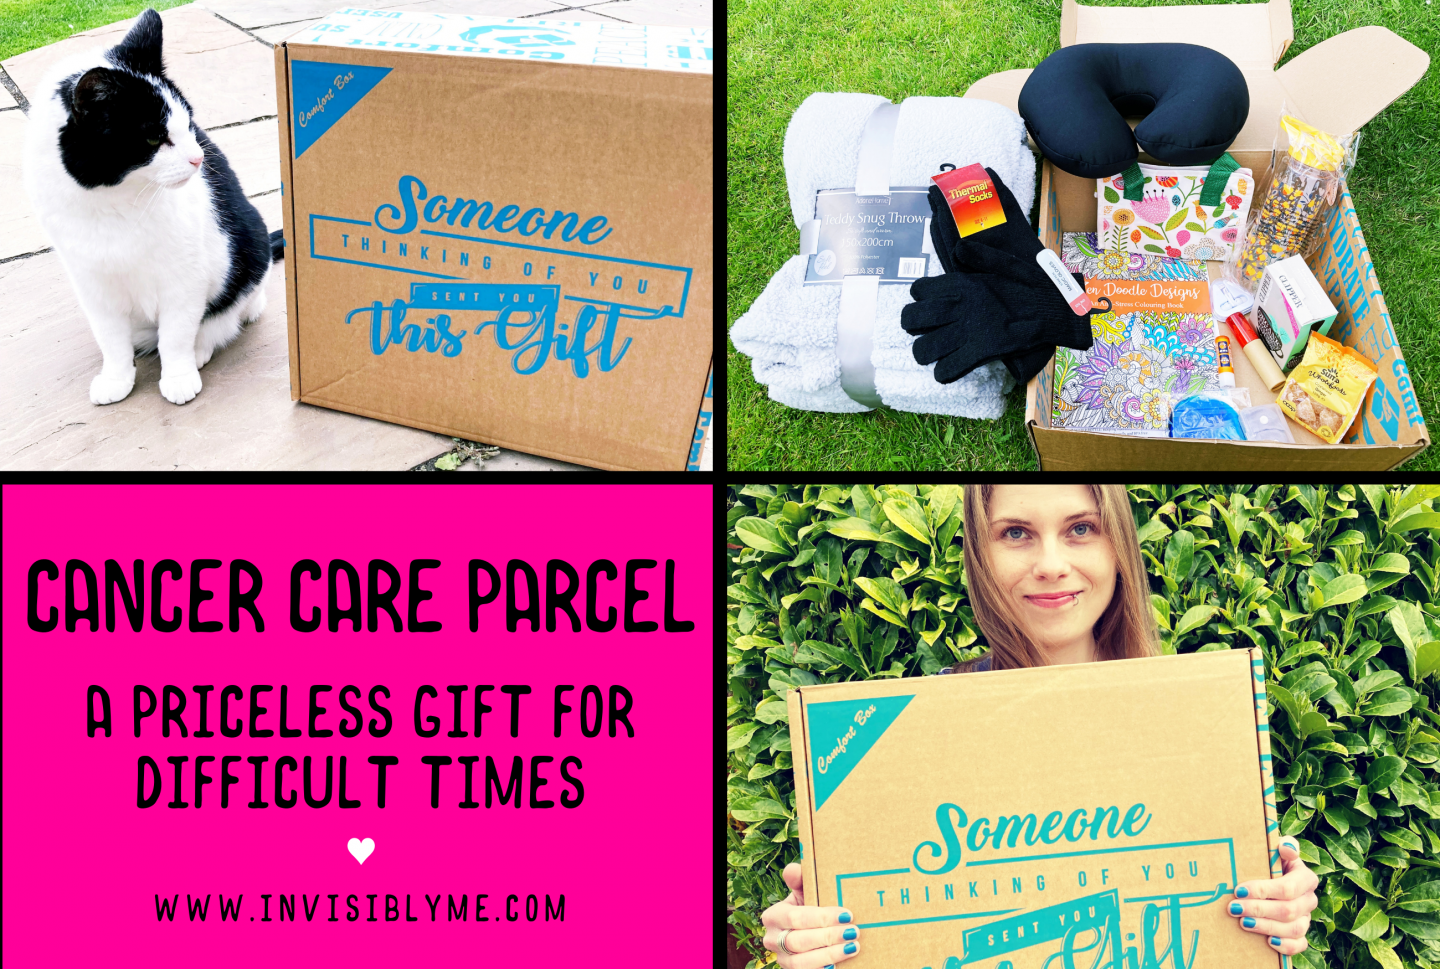 A collage of four rectangles. Three are images, showing me with the Cancer Care Parcel box for this review, one with my cat looking at it, and another with the contents of the opened box on the grass. The lower left rectangle is bright pink with black text reading : "Cancer care parcel. A priceless gift for difficult times" followed by invisibly me dot com.